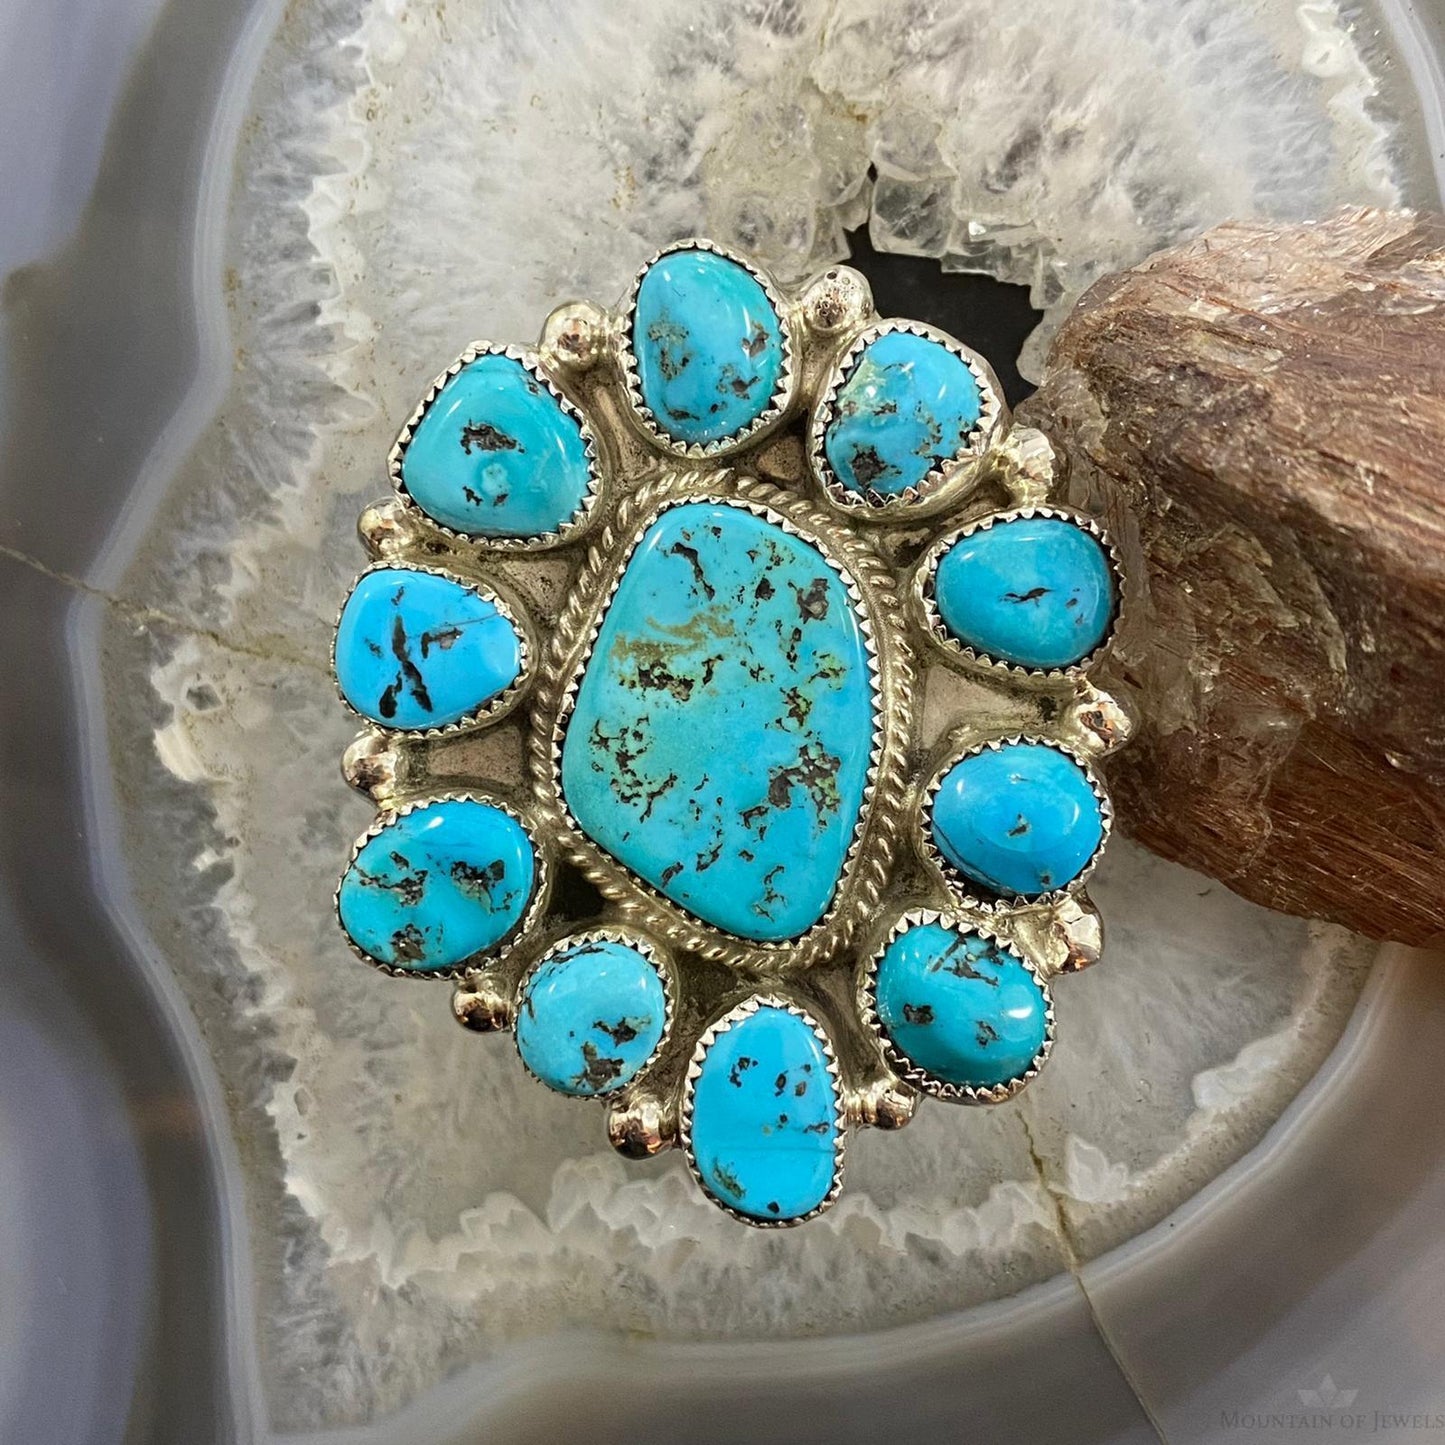 Silver Ray Sterling Silver Kingman Turquoise Cluster Flower Ring Sz 8 For Women